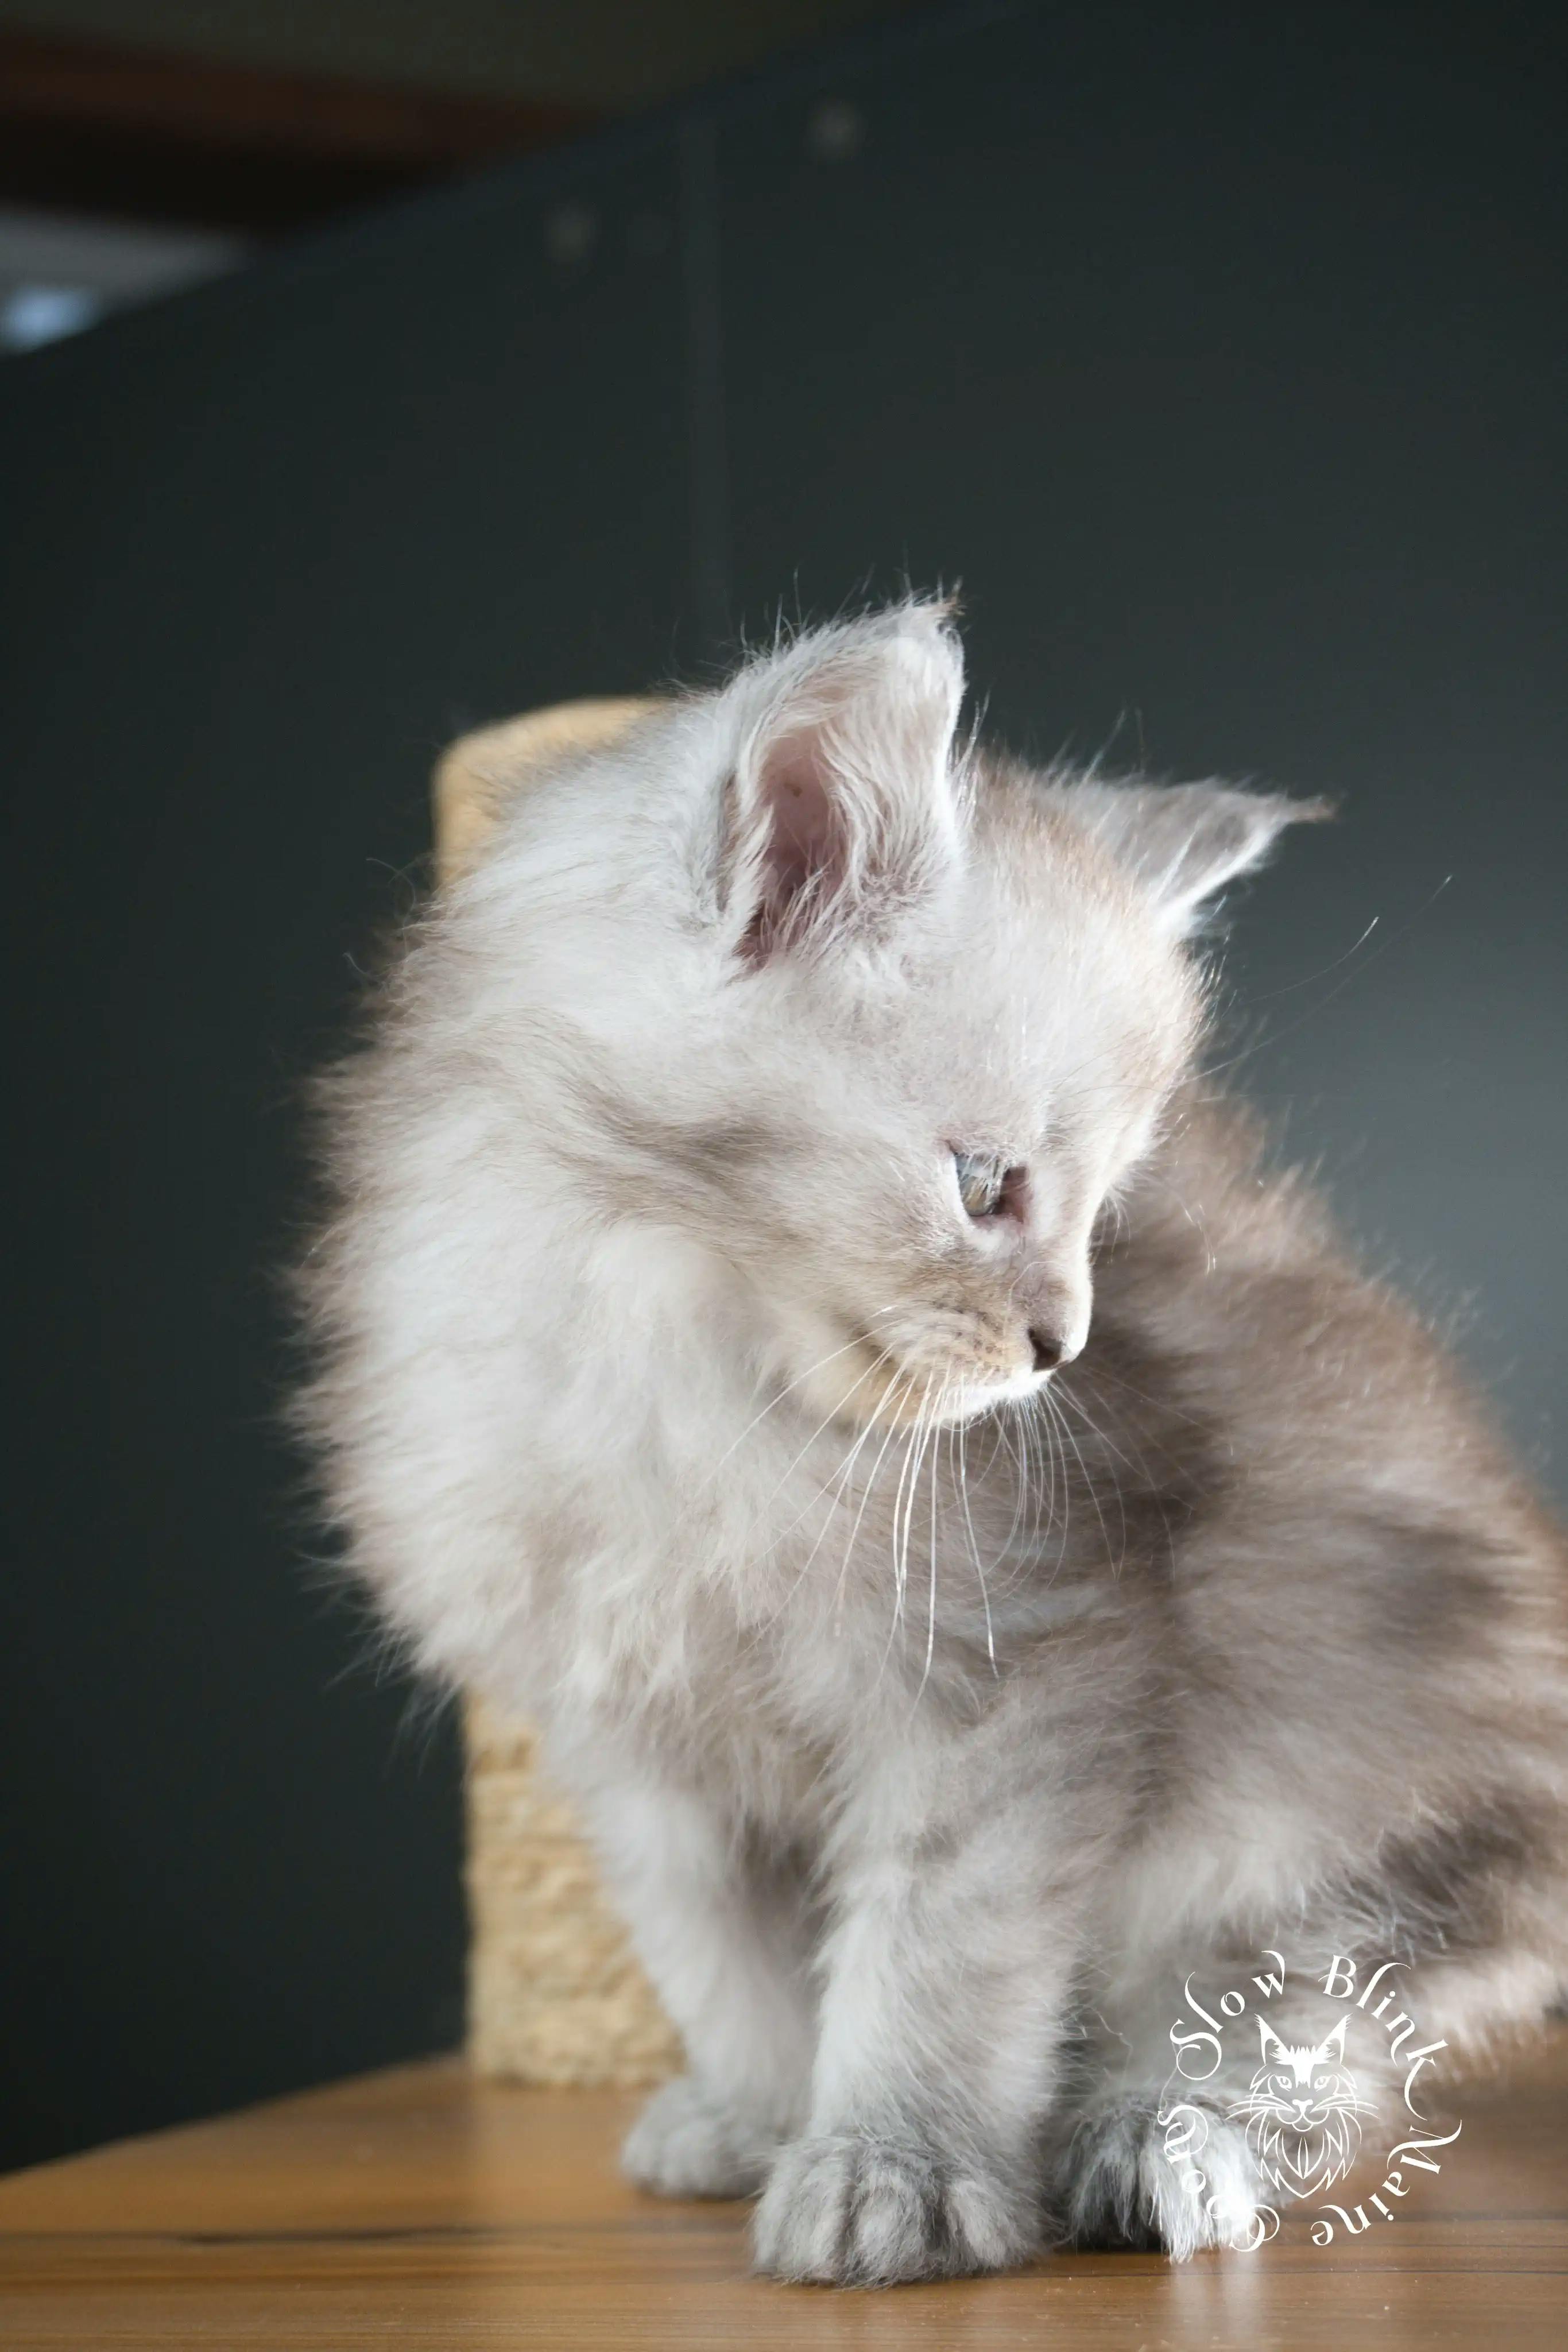 High Silver Maine Coon Kittens > black silver tabby maine coon kitten | ems code ns 22 23 24 25 | slowblinkmainecoons | 1003